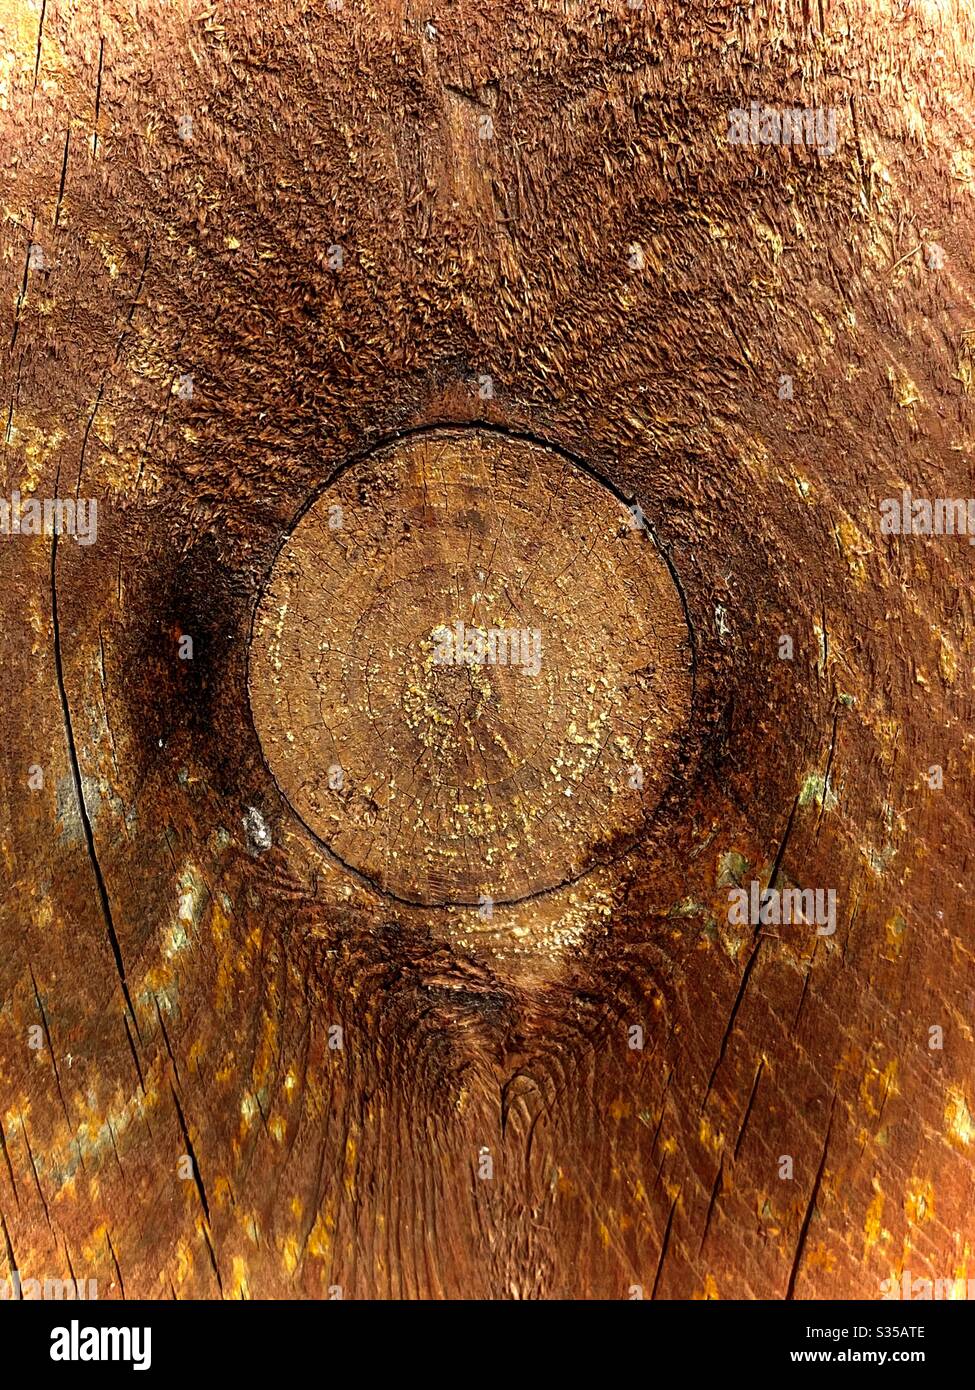 Artsy photo of a circular knot in wood. Stock Photo